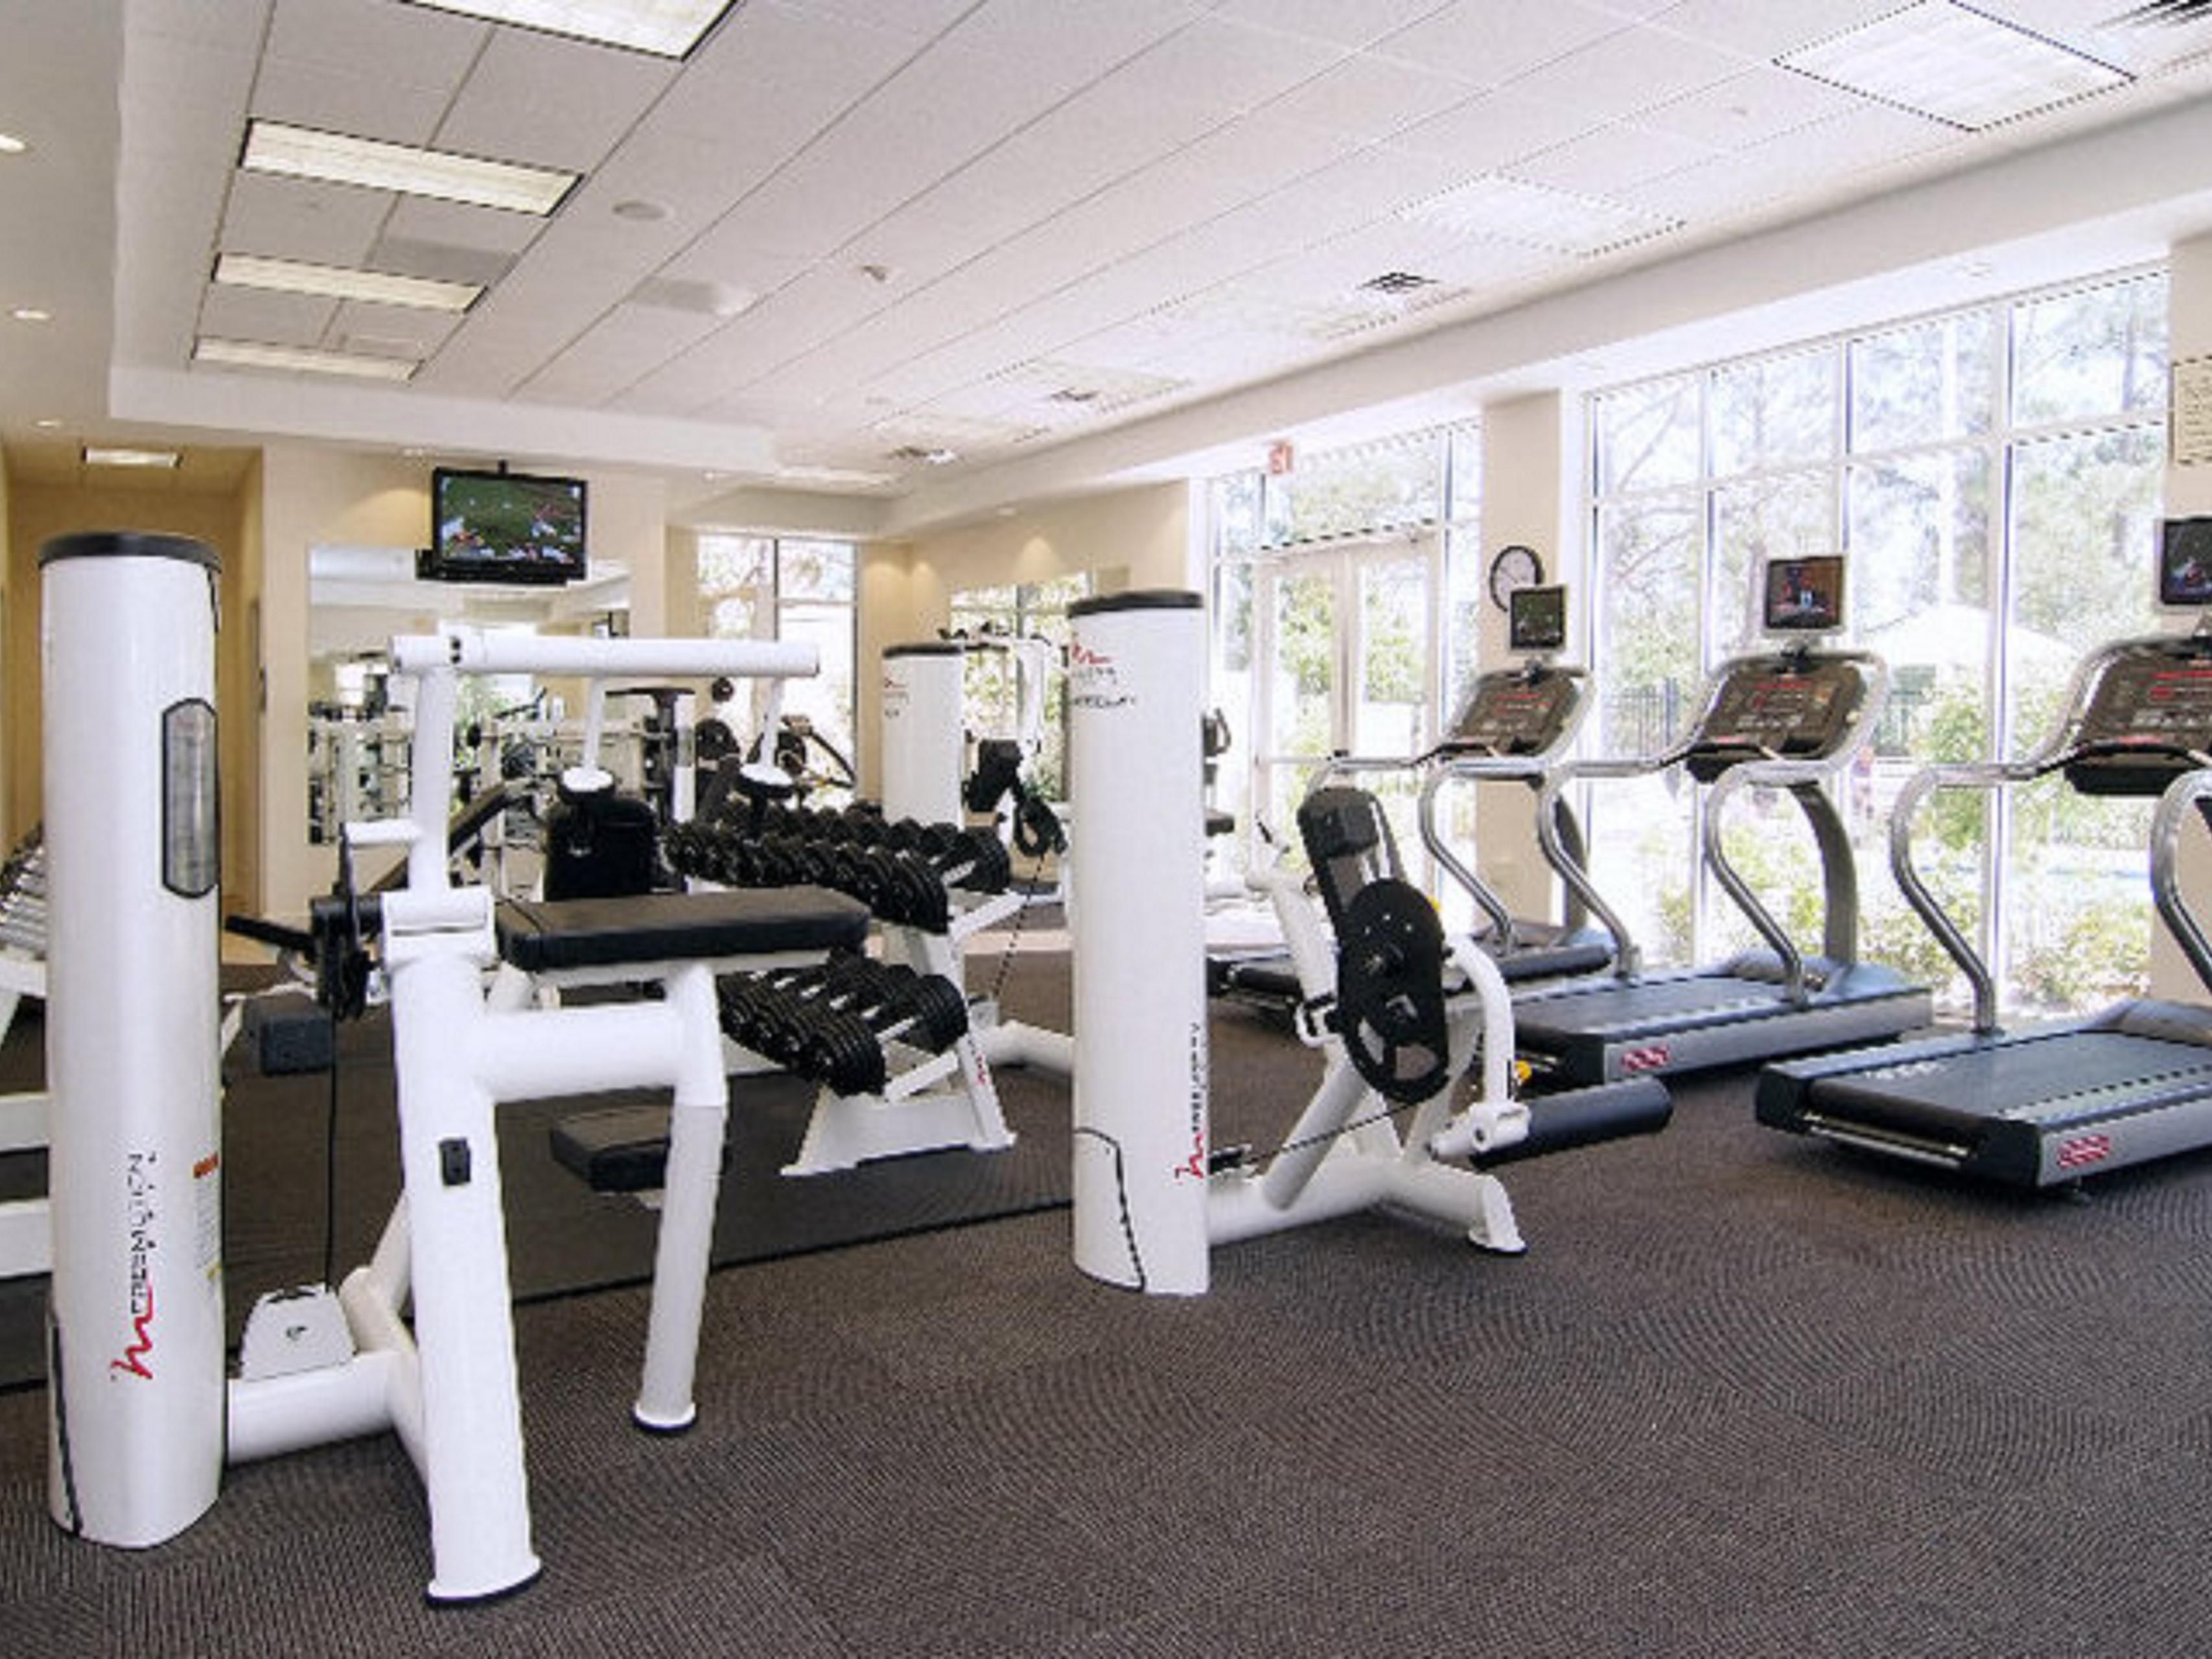 Stay fit and get your blood pumping in our state-of-the-art fitness center that is open 24/7 for your convenience. Enjoy high-quality equipment including stair steppers, treadmills, elliptical machines, free weights, and stationary bicycles. 